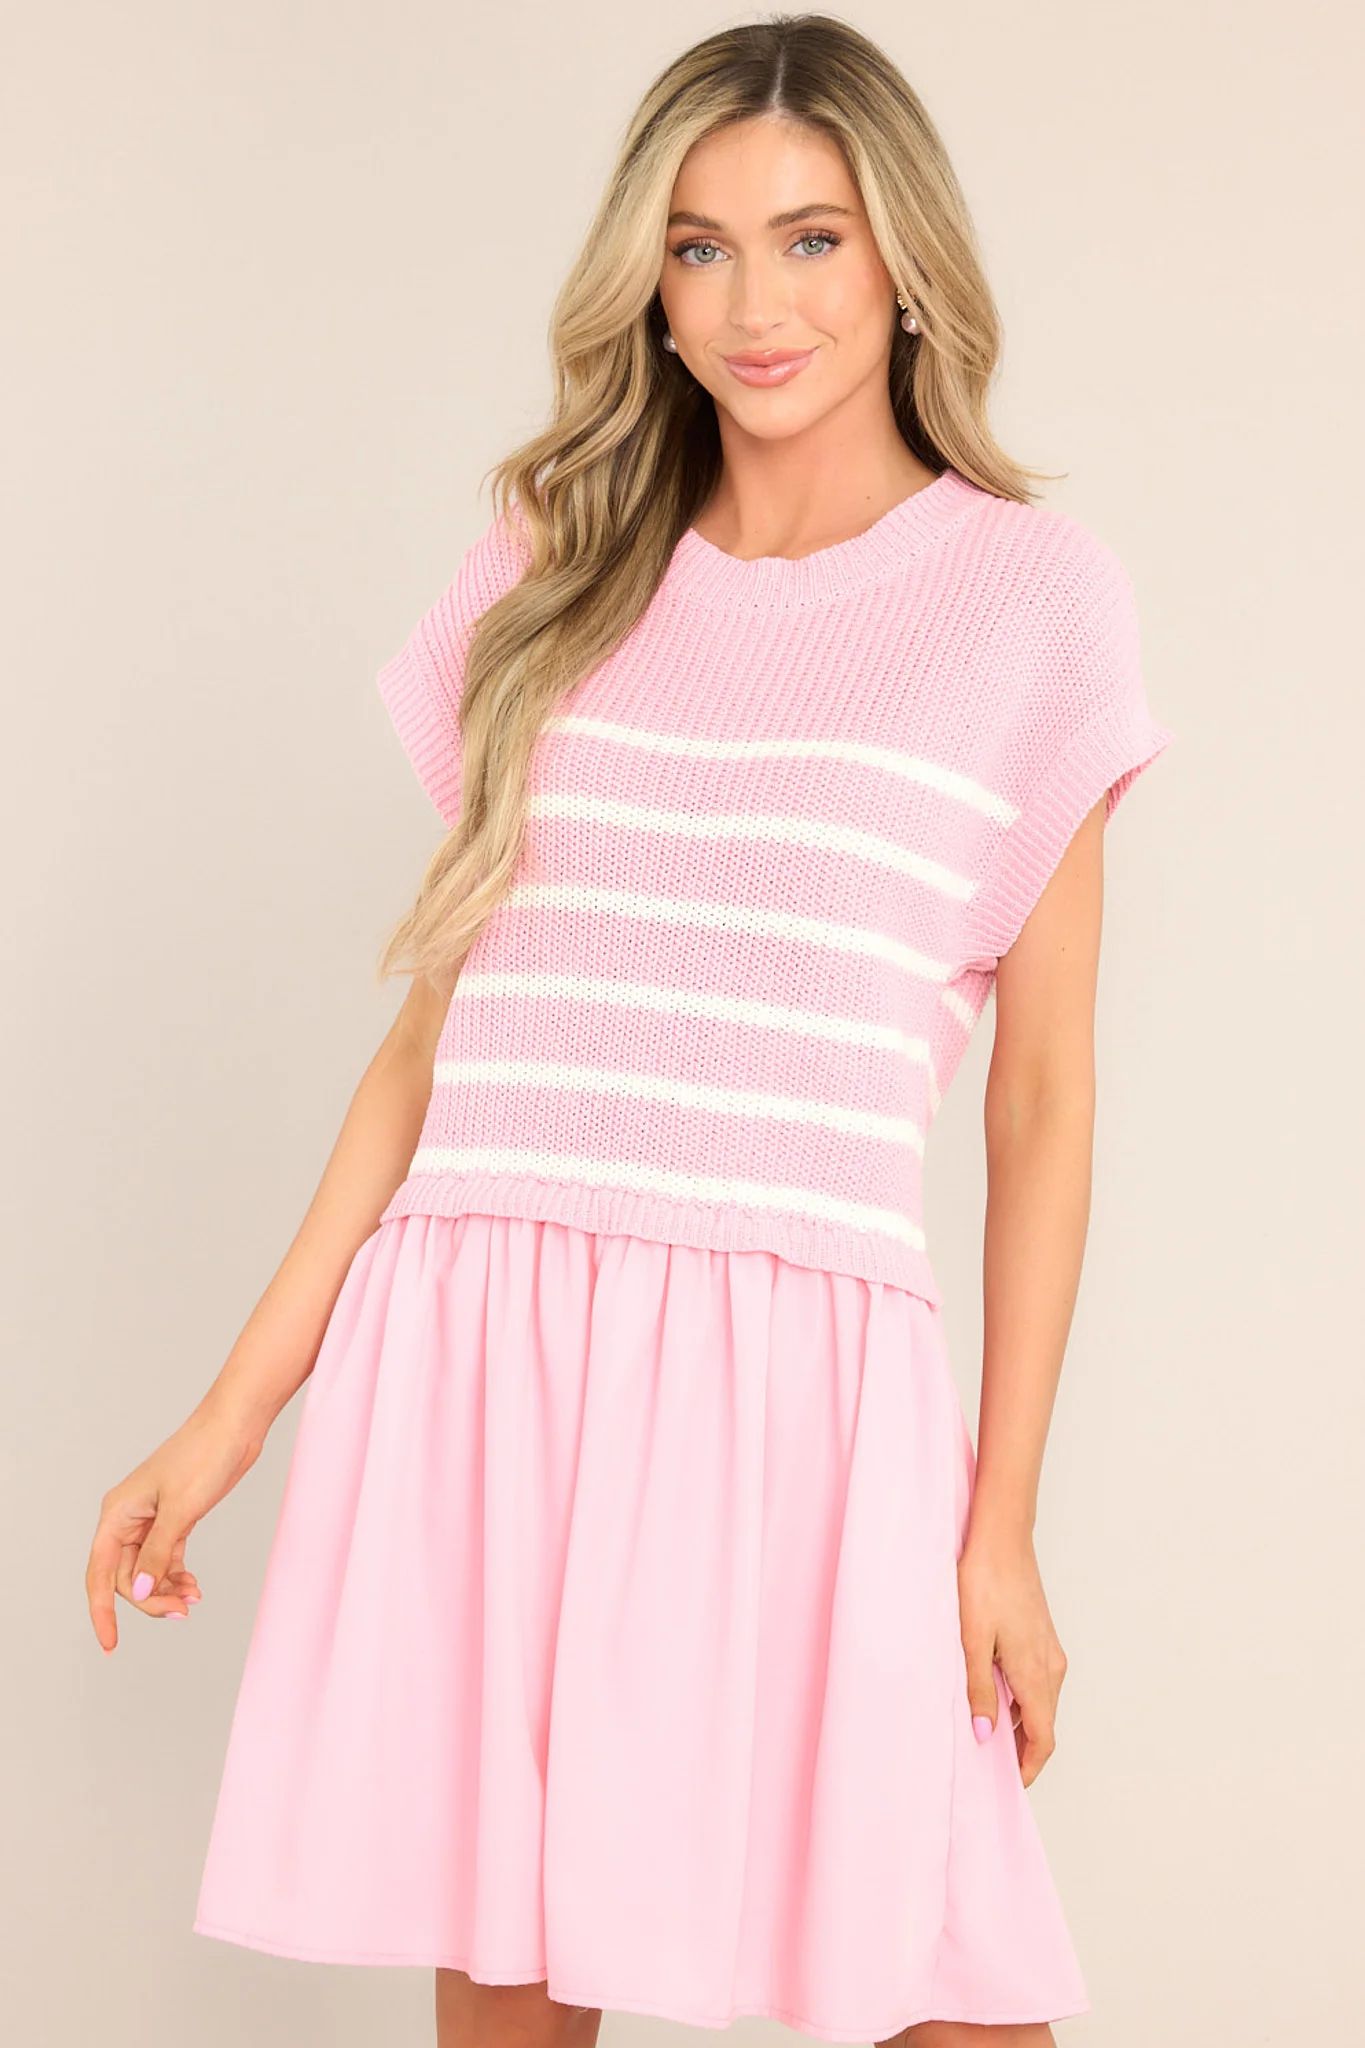 Journey Continues Pink & White Stripe Sweater Mini Dress | Red Dress